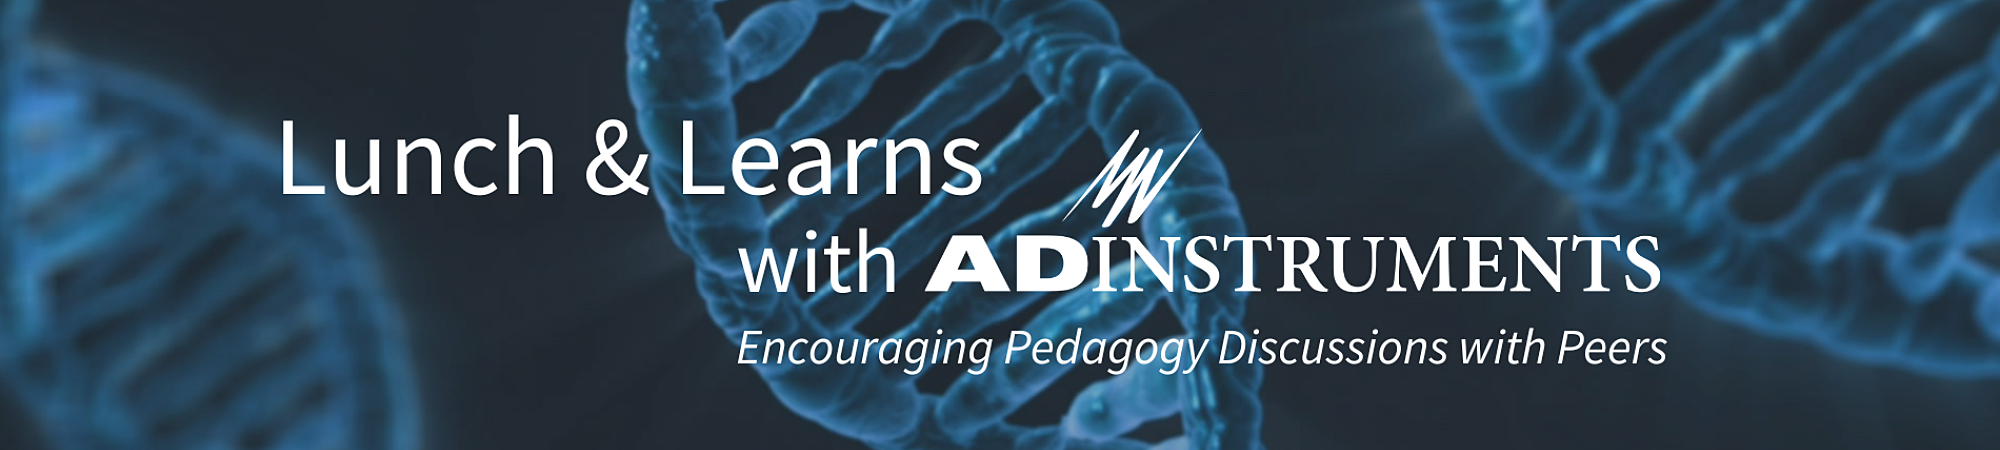 Banner showing imagery of DNA helices. The text on the banner reads "Lunch & Learns with ADInstruments" and "Encouraging Pedagogy Discussions with Peers". 